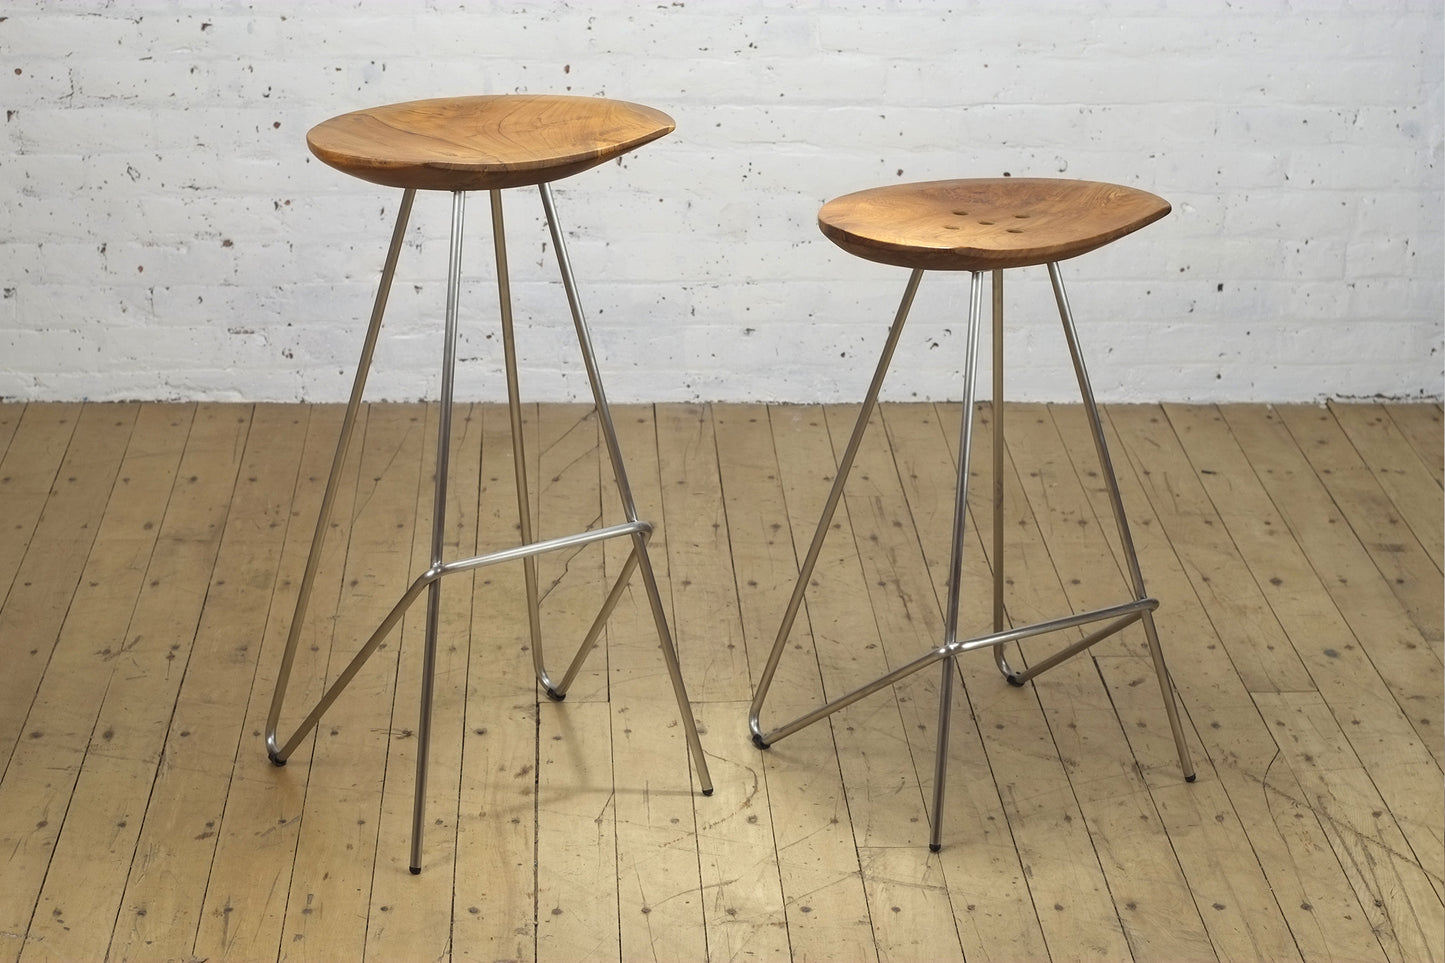 Perch Stool- Stainless Steel